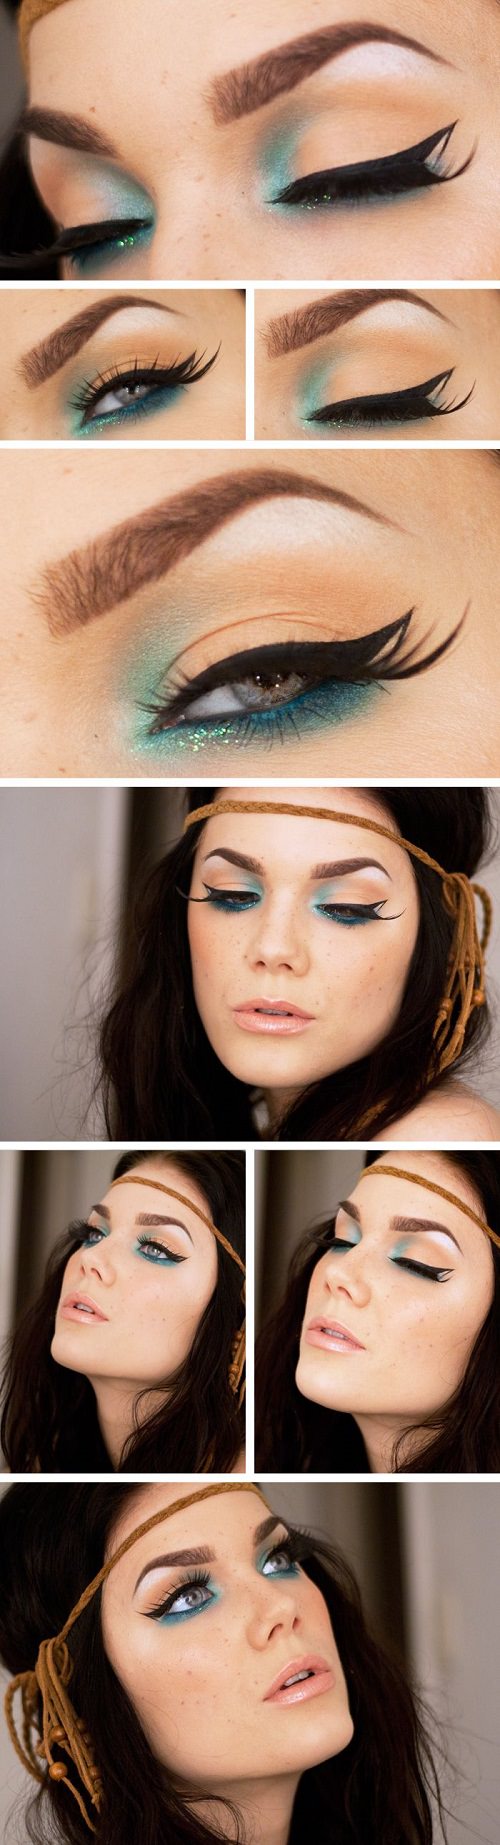 Make your eyes pop with these quick and simple makeup tutorials.